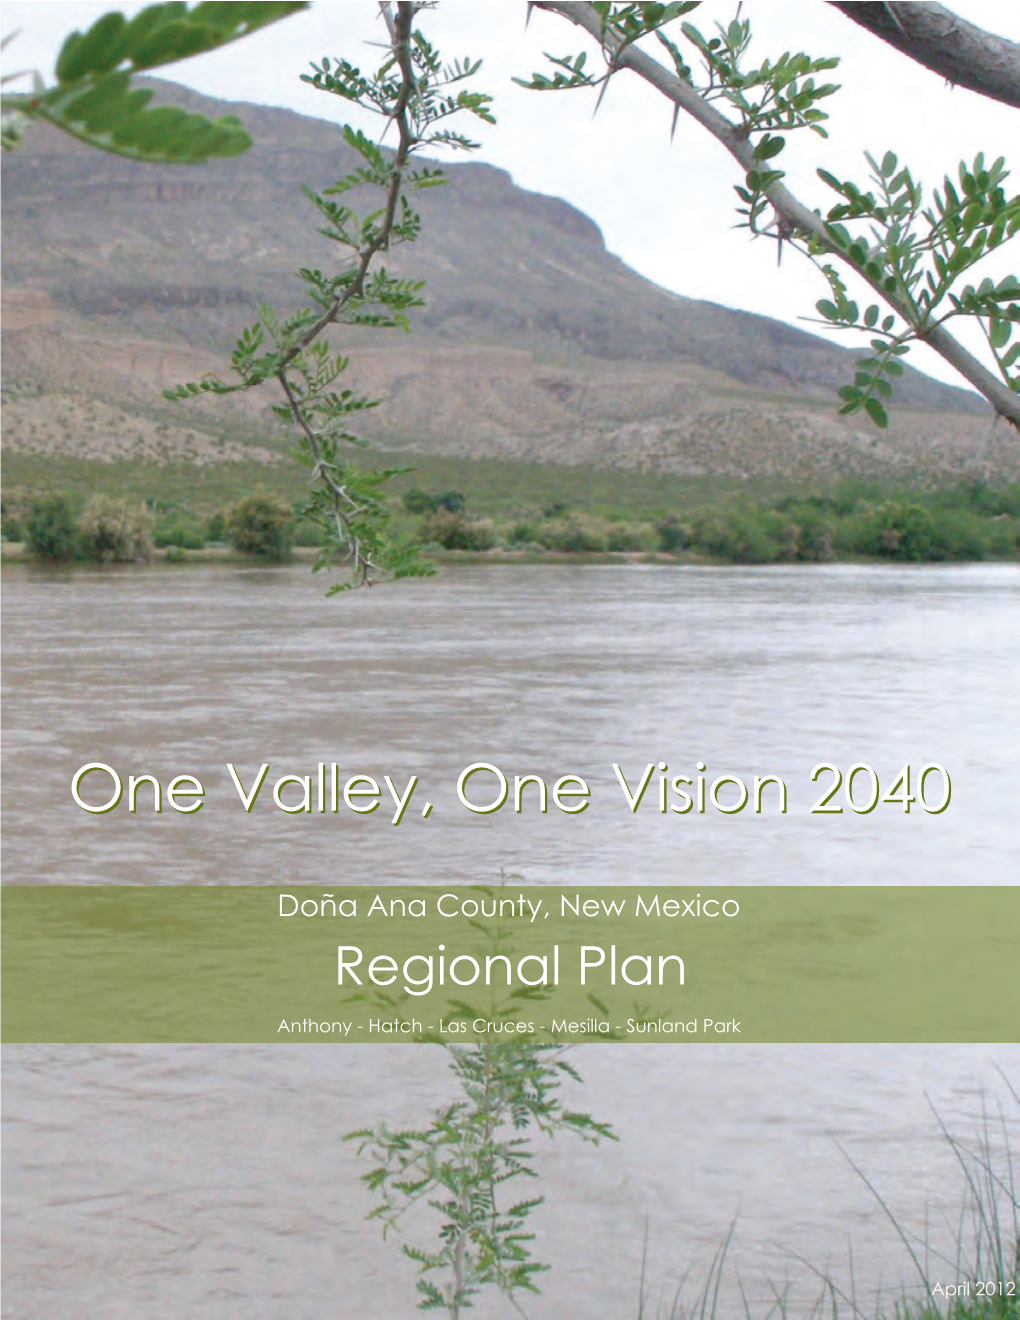 One Valley, One Vision 2040 Regional Plan